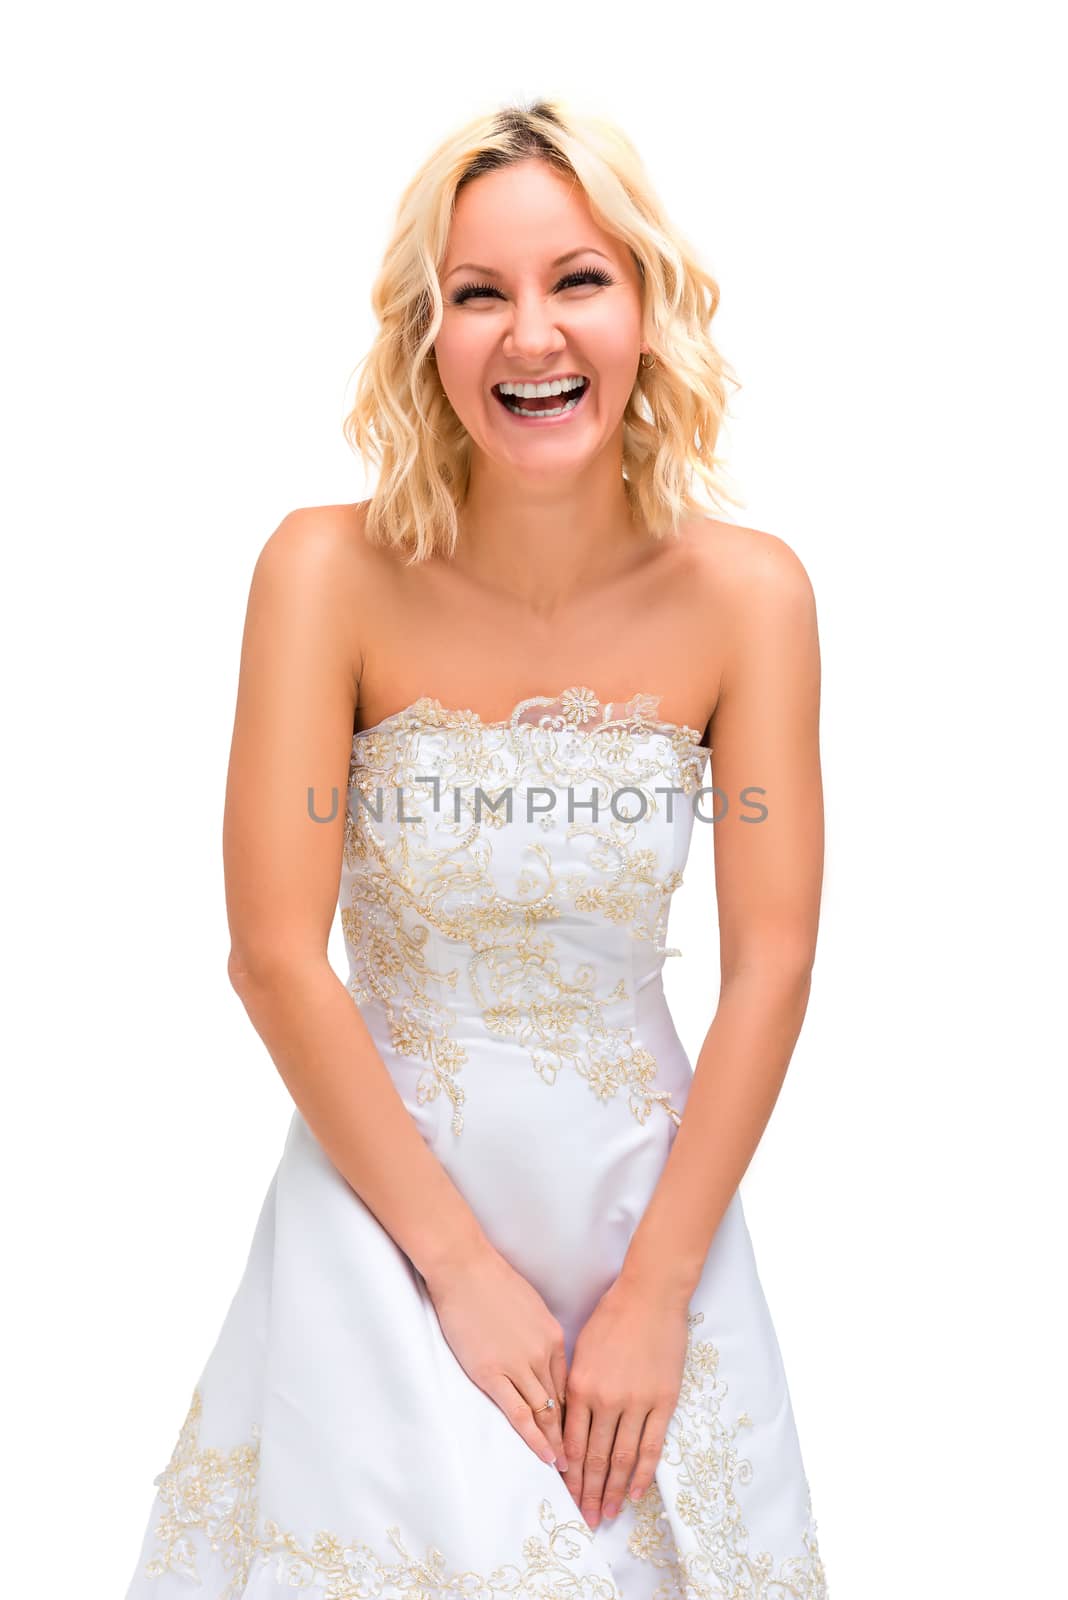 blonde girl cheerfully laughs in a wedding dress on a white back by kosmsos111